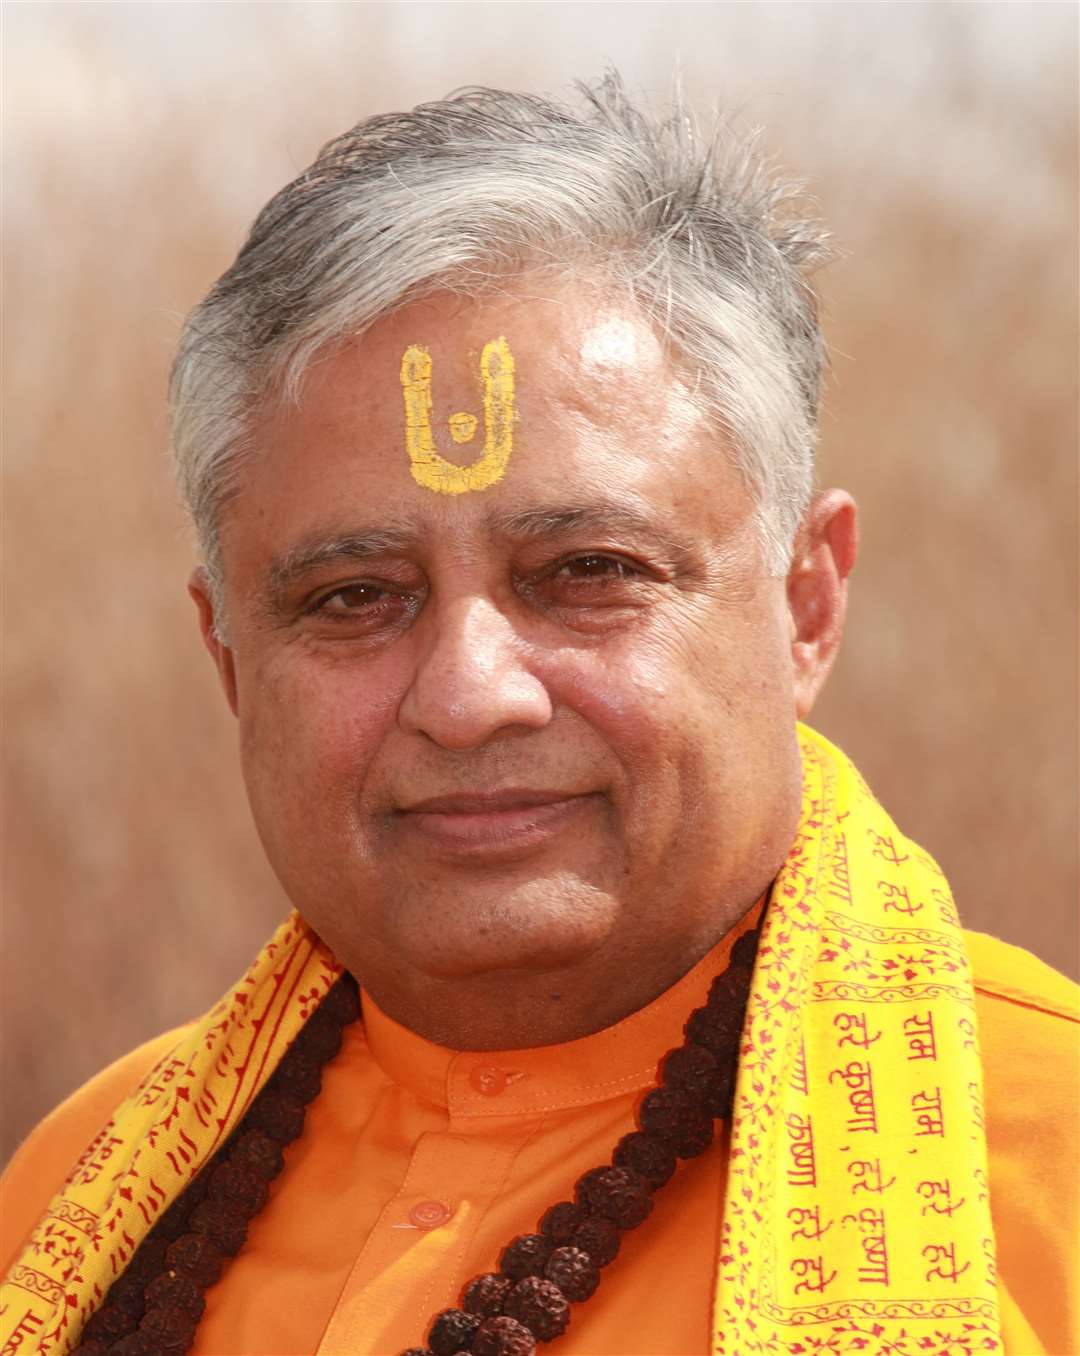 Universal Society of Hinduism president Rajan Zed called for the Whitstable company to apologise